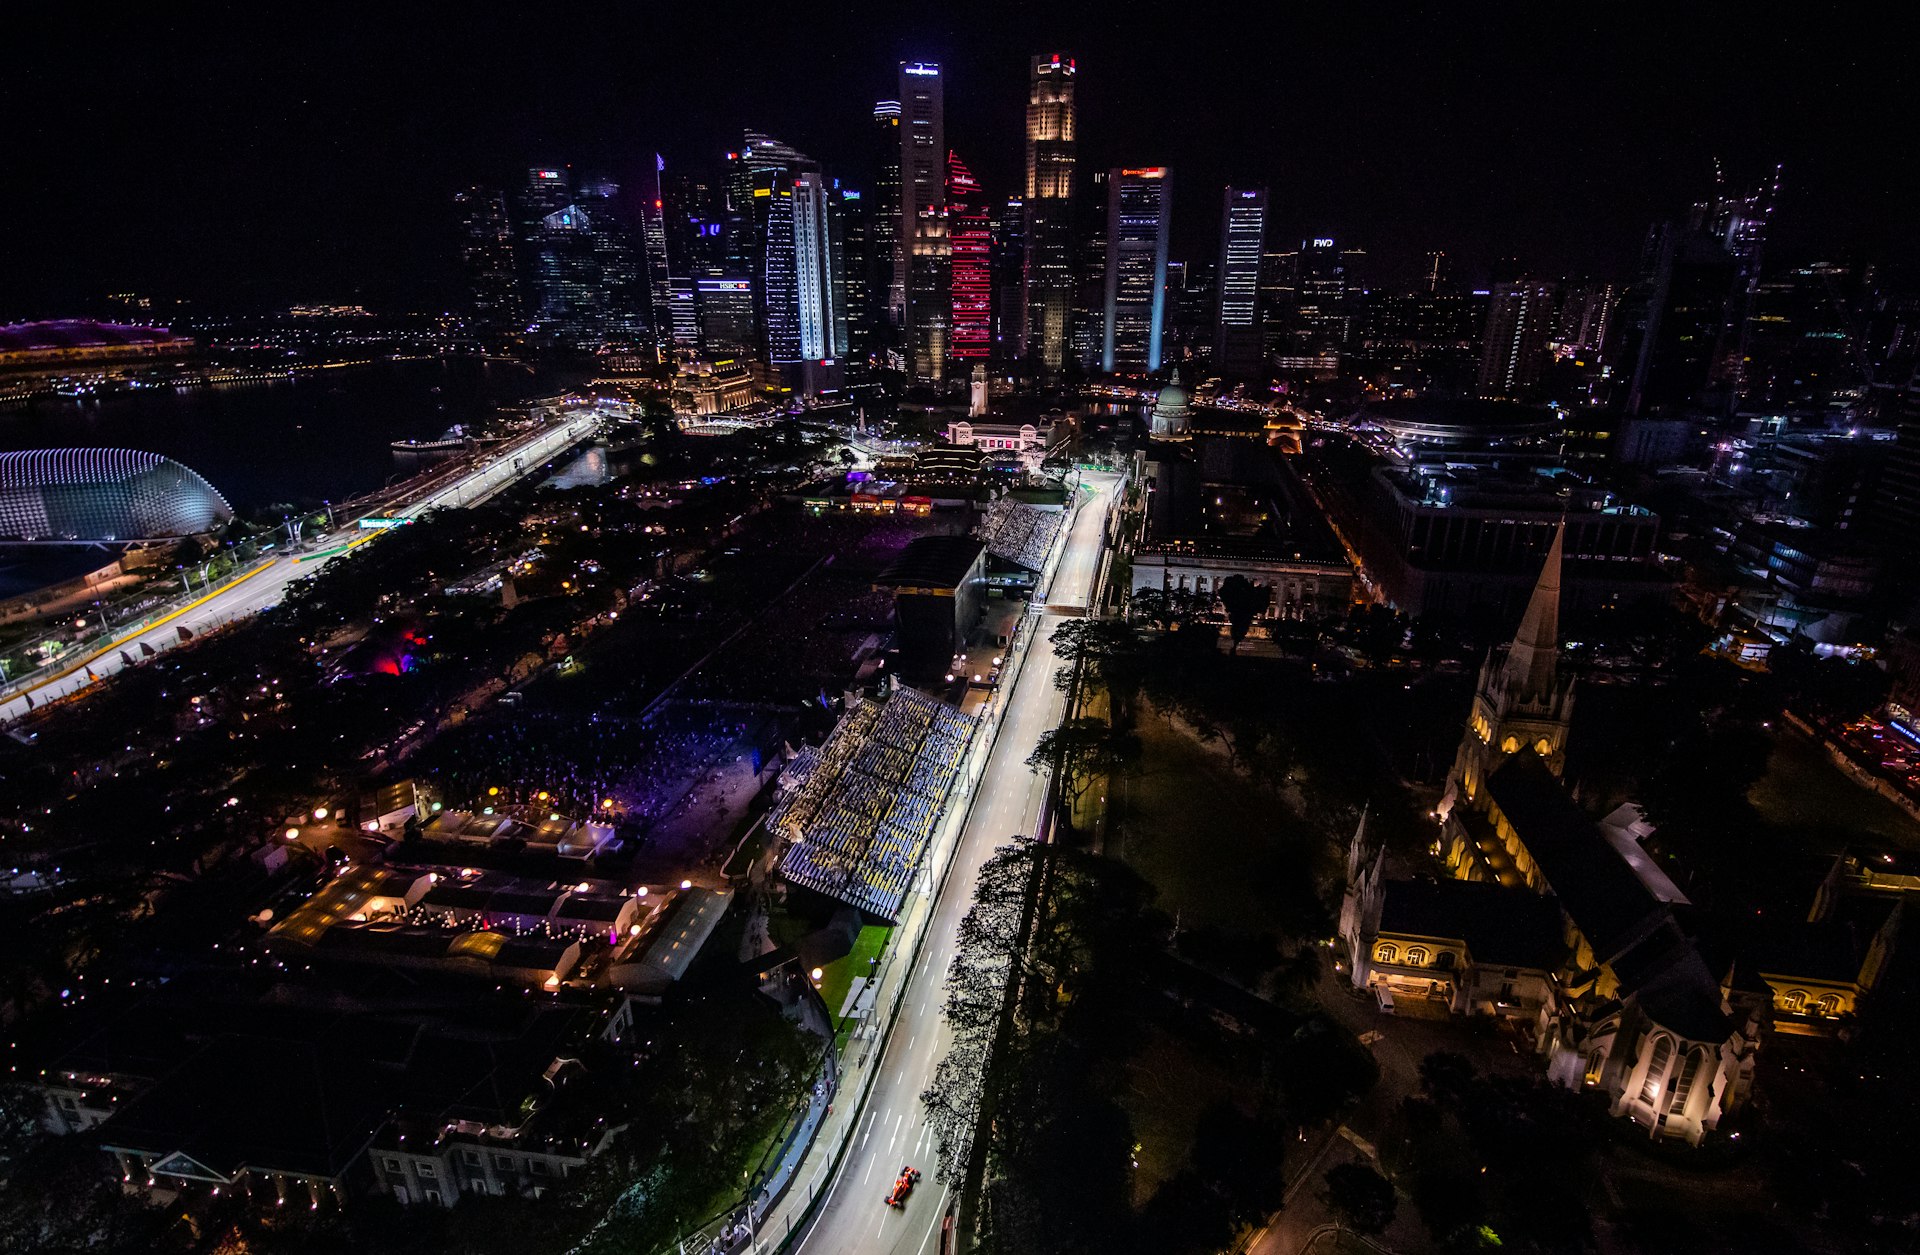 Overhead view at night of the Singapore skyline and racetrack. The track is illuminated and a Ferrari is visible in the foreground.